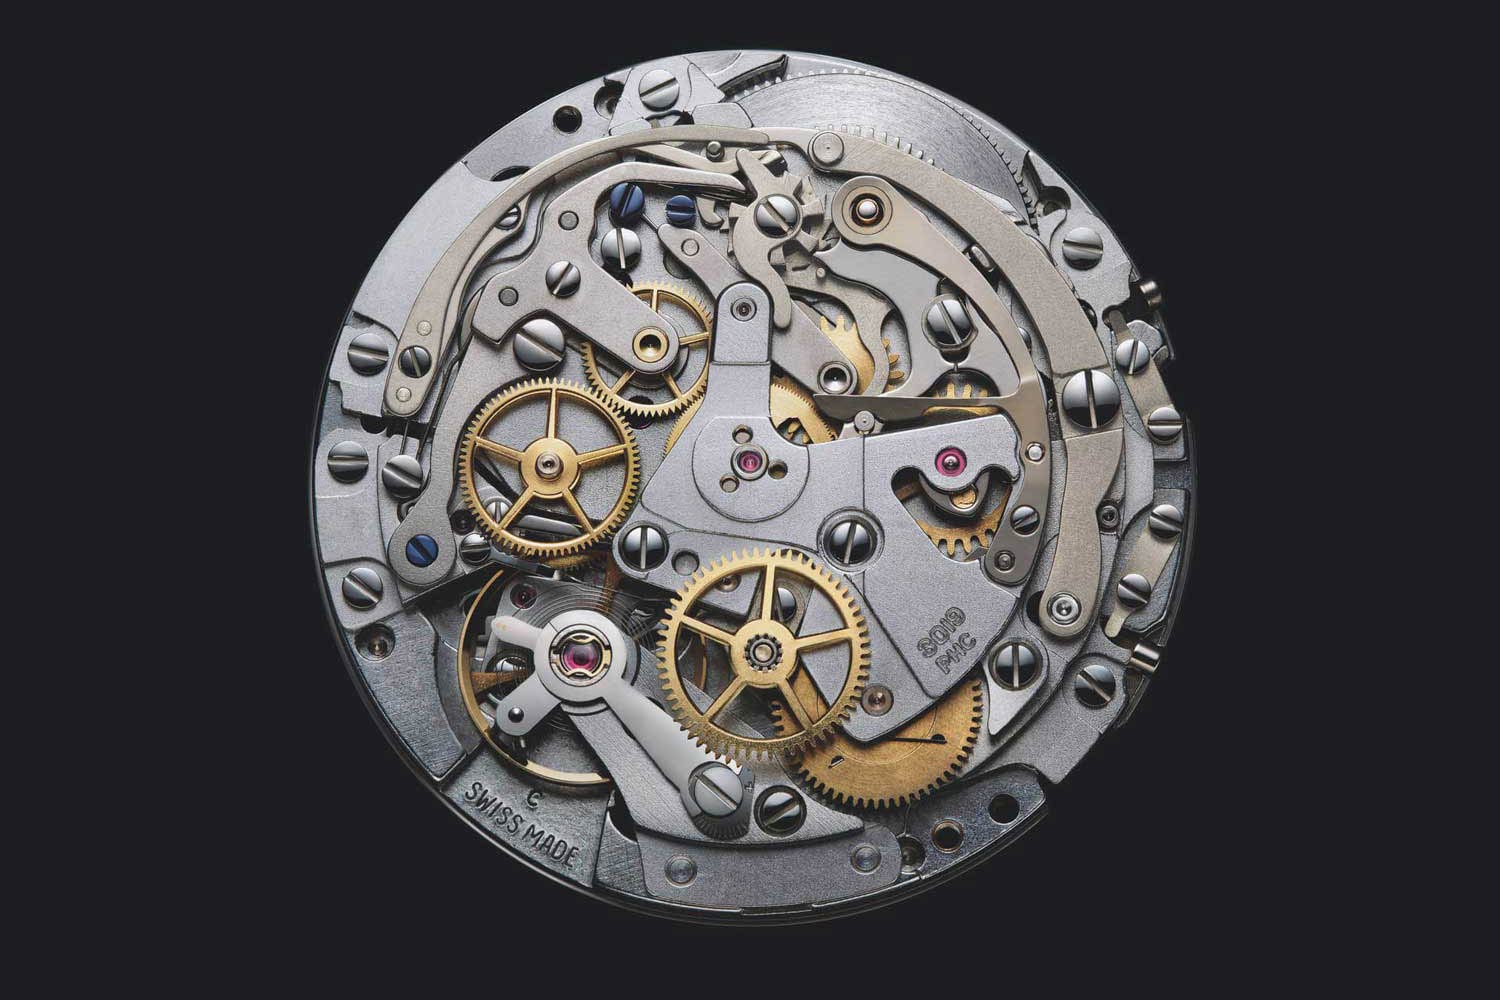 When Zenith announced the El Primero in 1969, it was the world's first fully integrated self-winding chronograph movement.